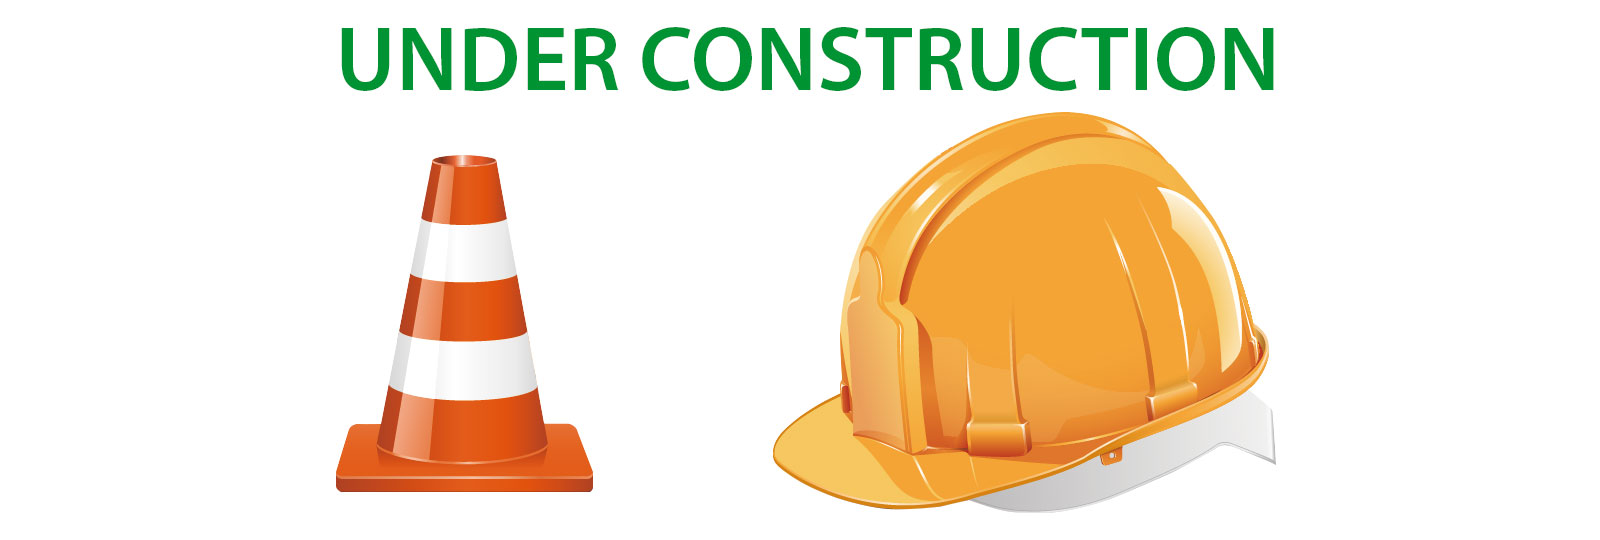 under construction traffic cone and yellow hard hat illustration